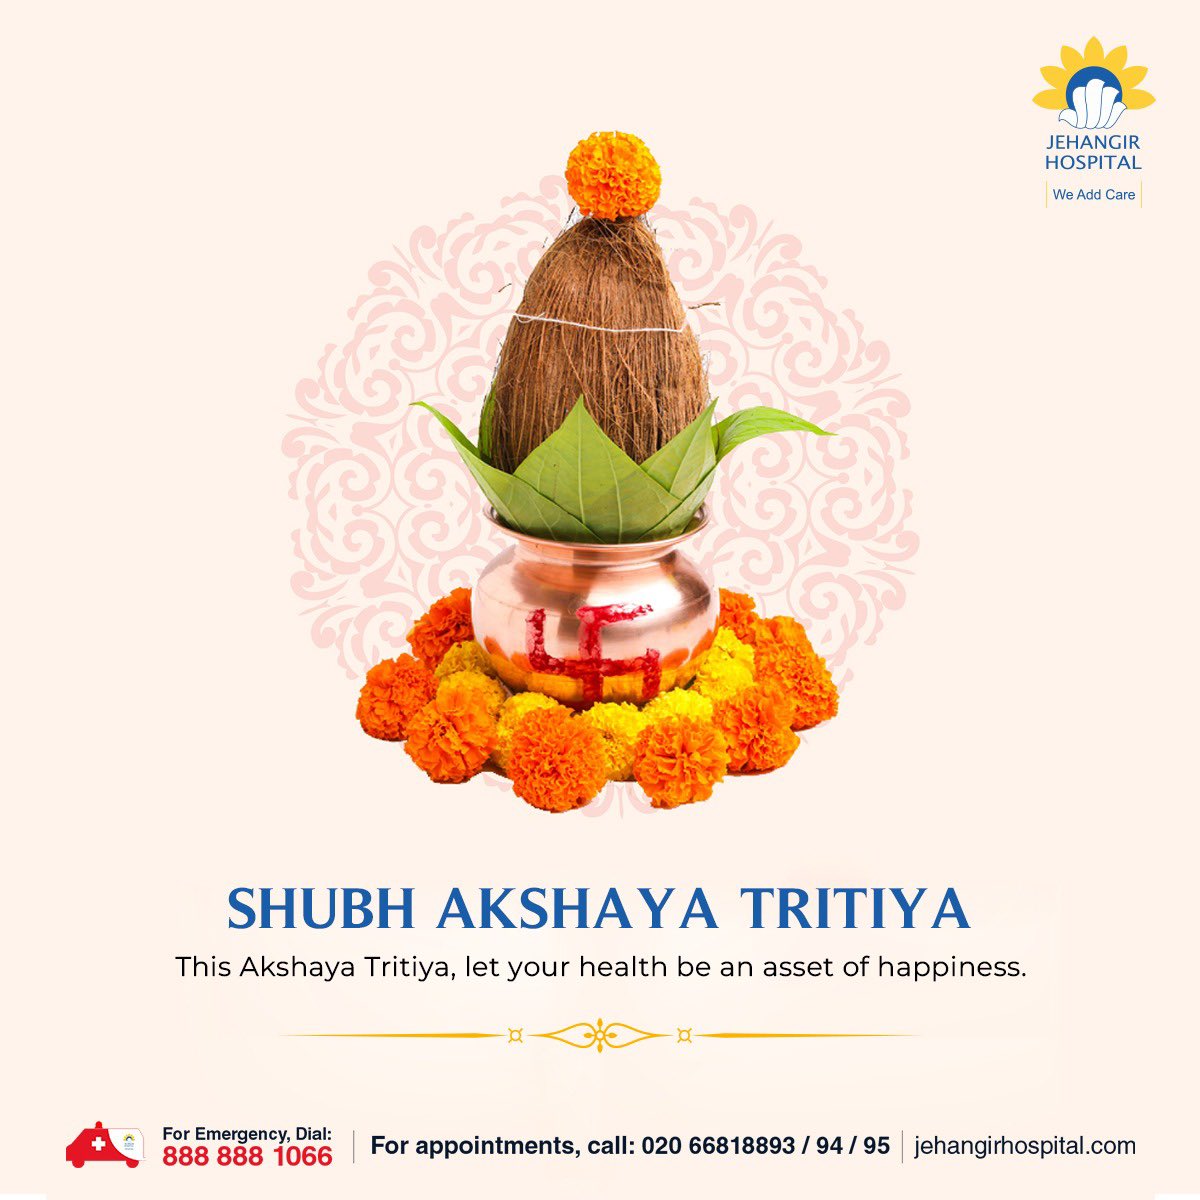 On this auspicious occasion of Akshay Tritiya, we extend our warmest wishes to all those celebrating. May this day bring you and your loved ones an abundance of prosperity, success, and good fortune. Happy Akshay Tritiya!

#JehangirHospital #HealthcareServices  #AkshayTritiya